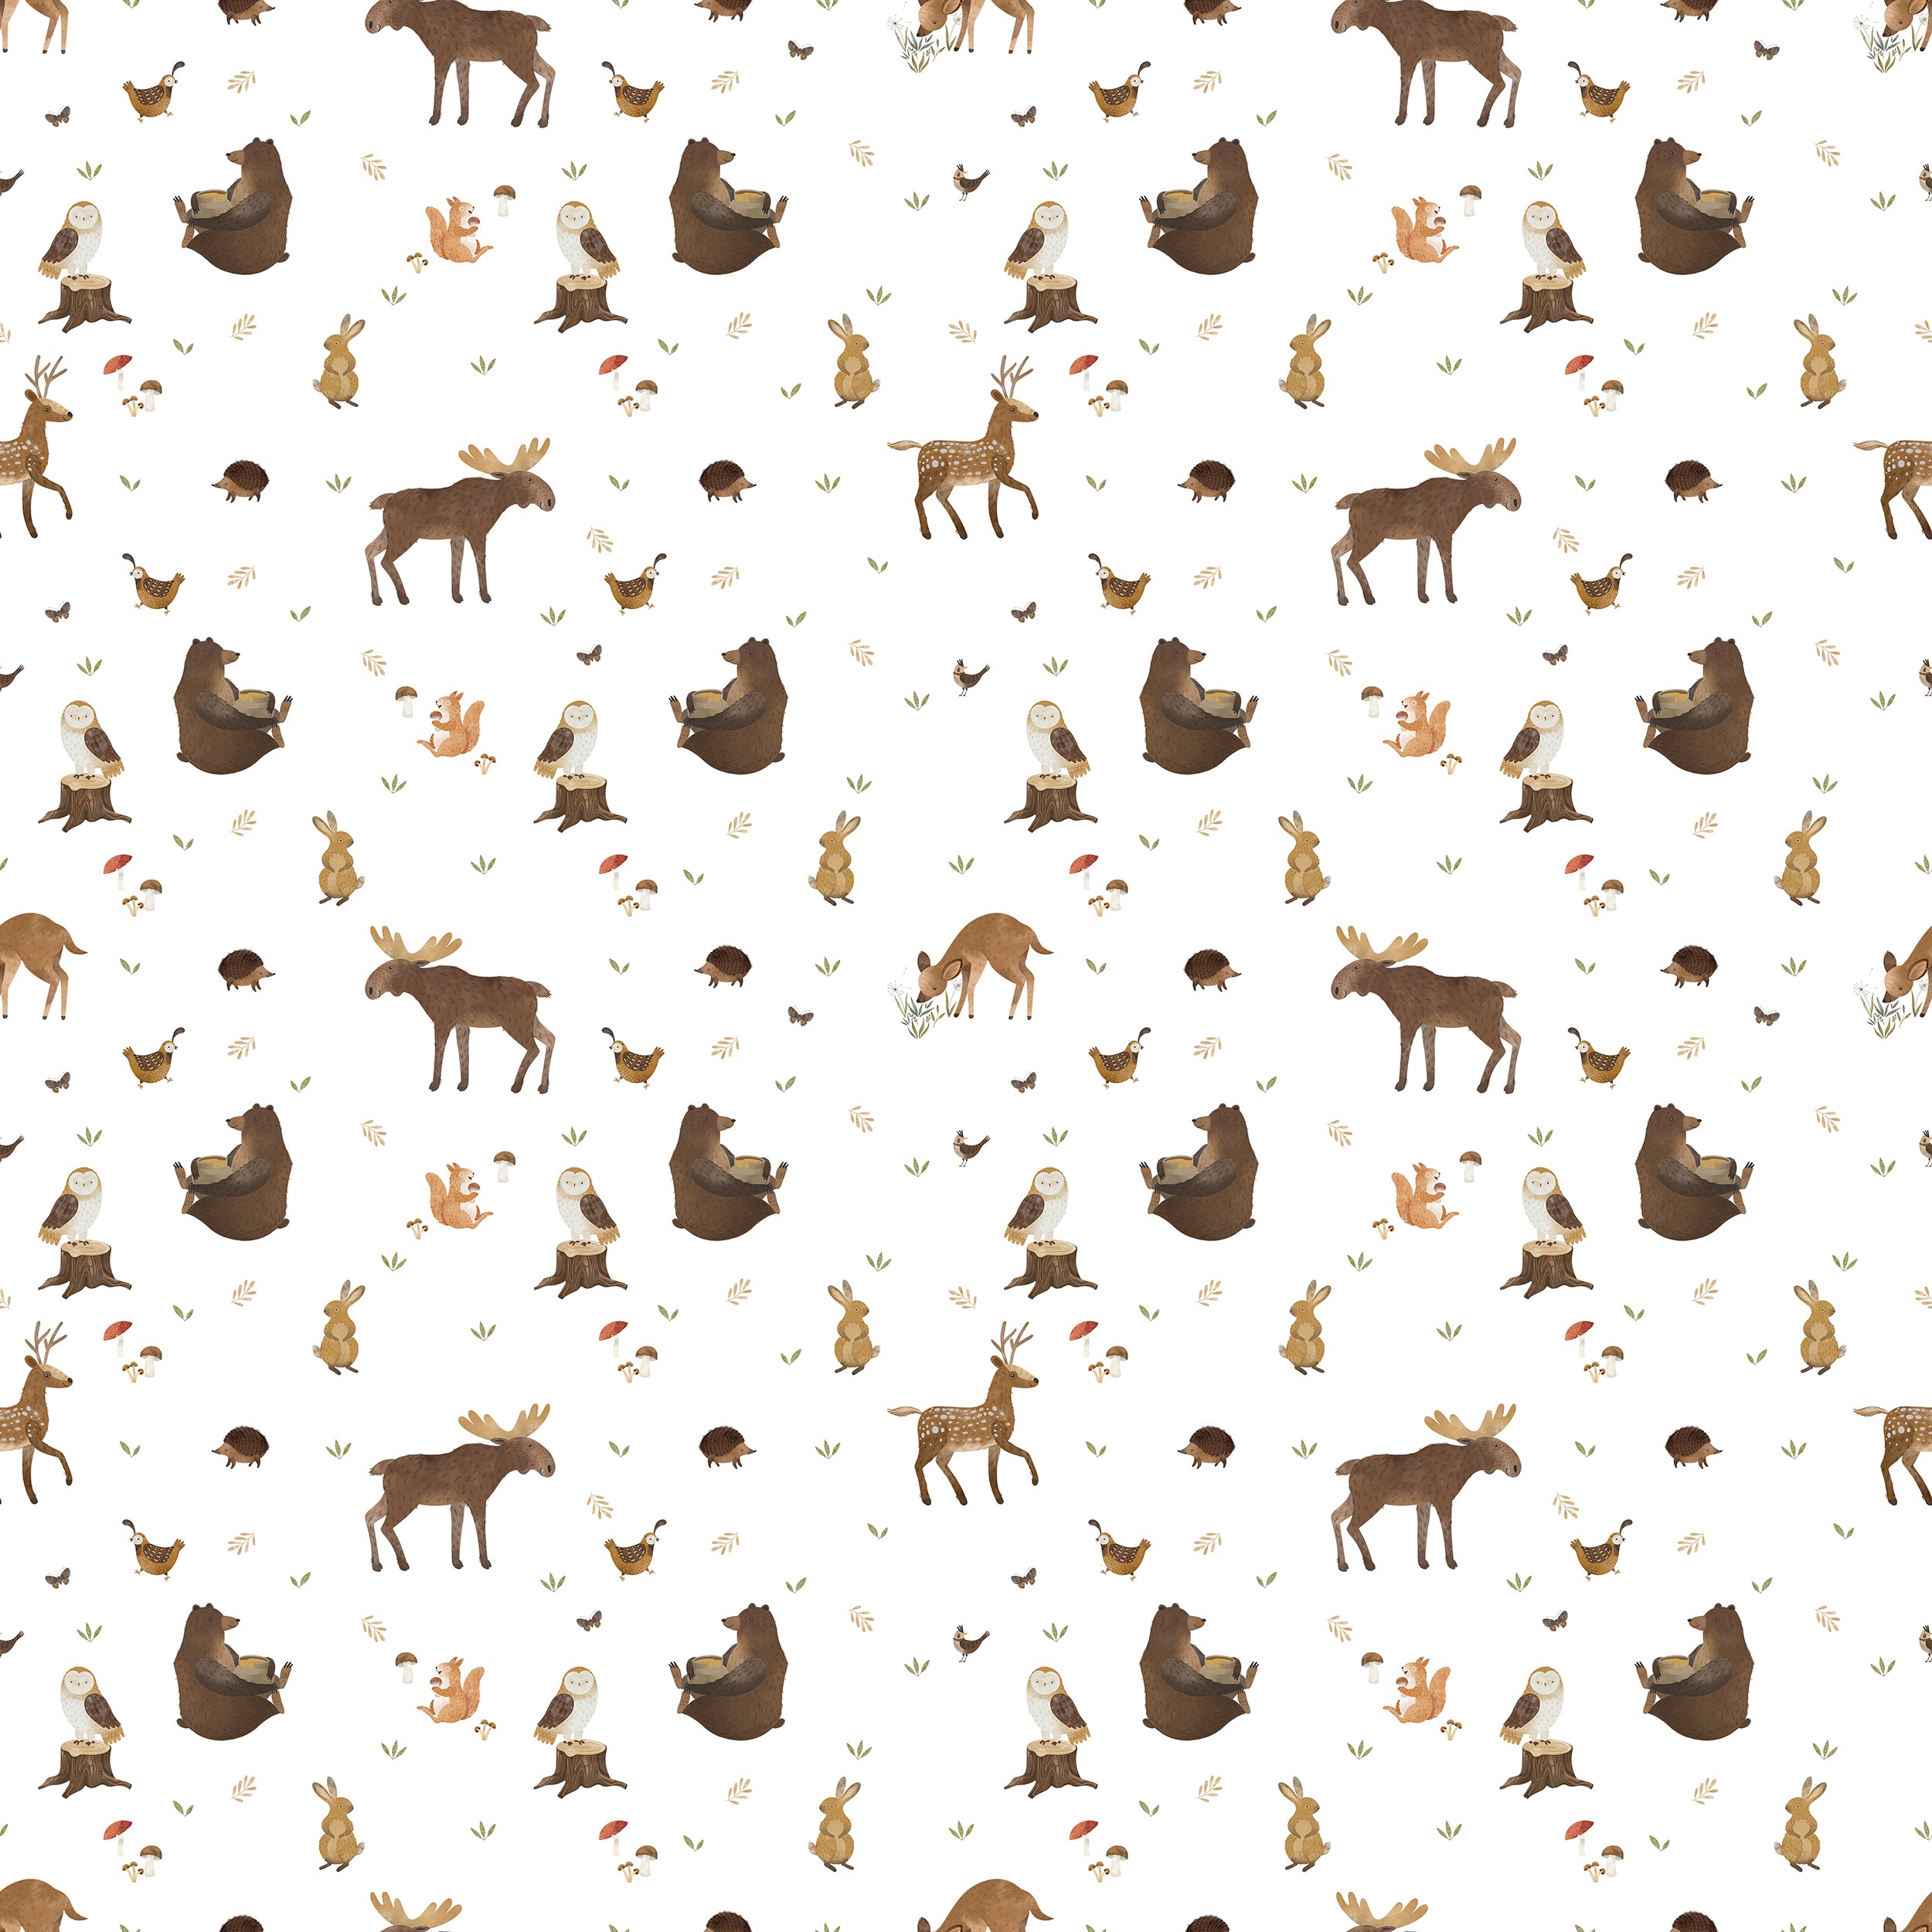 Close-up view of Deer and Bear Wallpaper featuring a playful pattern of deer and bears in various poses with small forest elements like leaves and bushes on a white background, perfect for adding a whimsical touch to any room